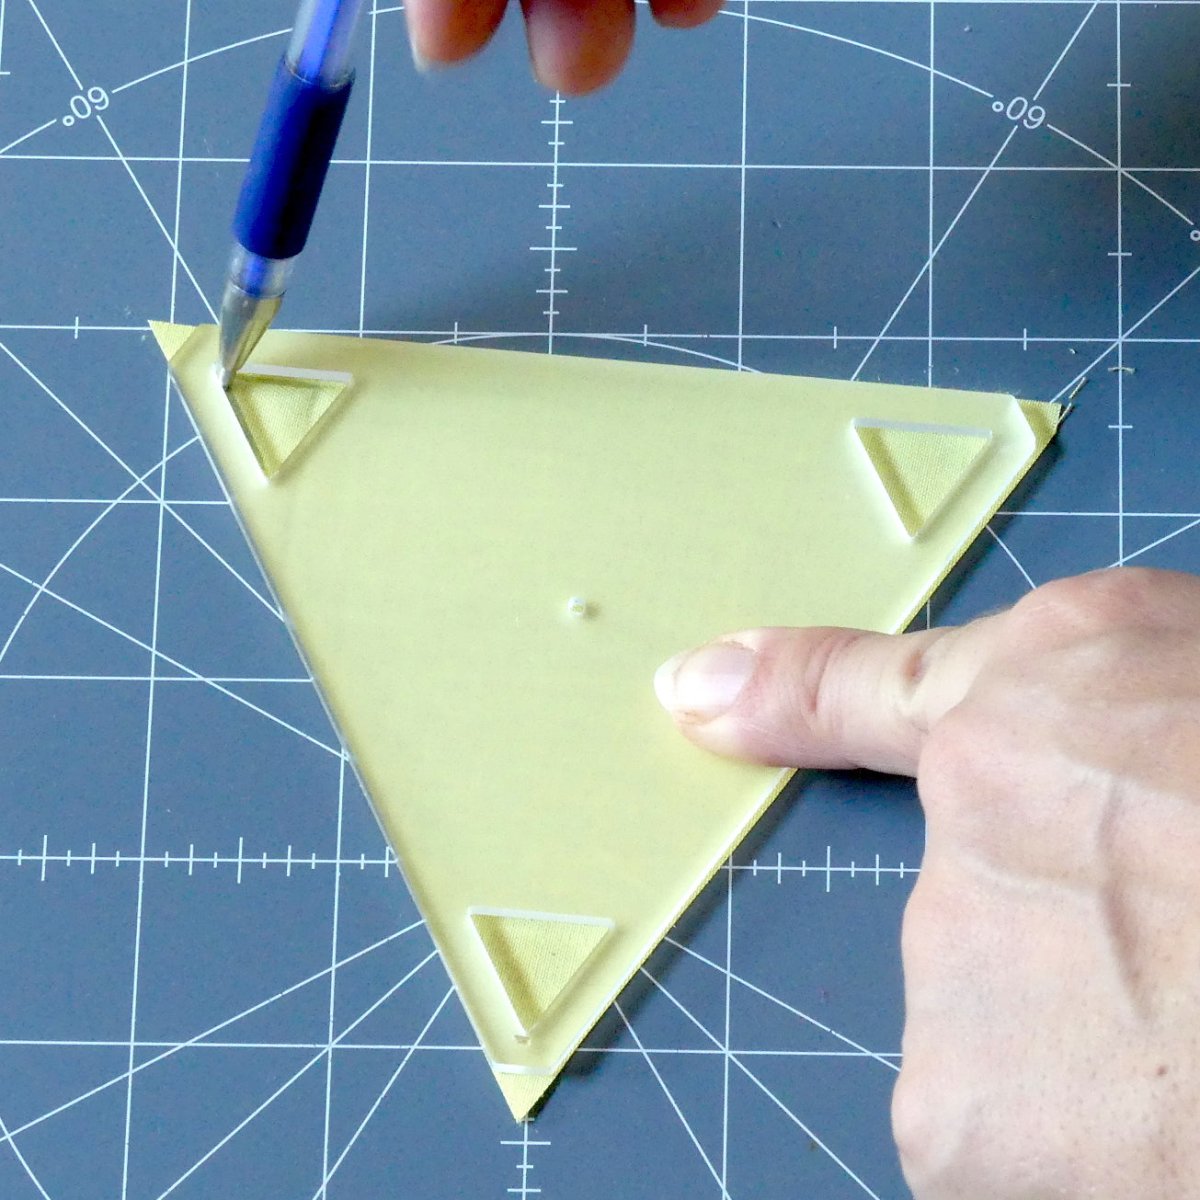 Marking in the little triangle of a 60 degree Triangle Template